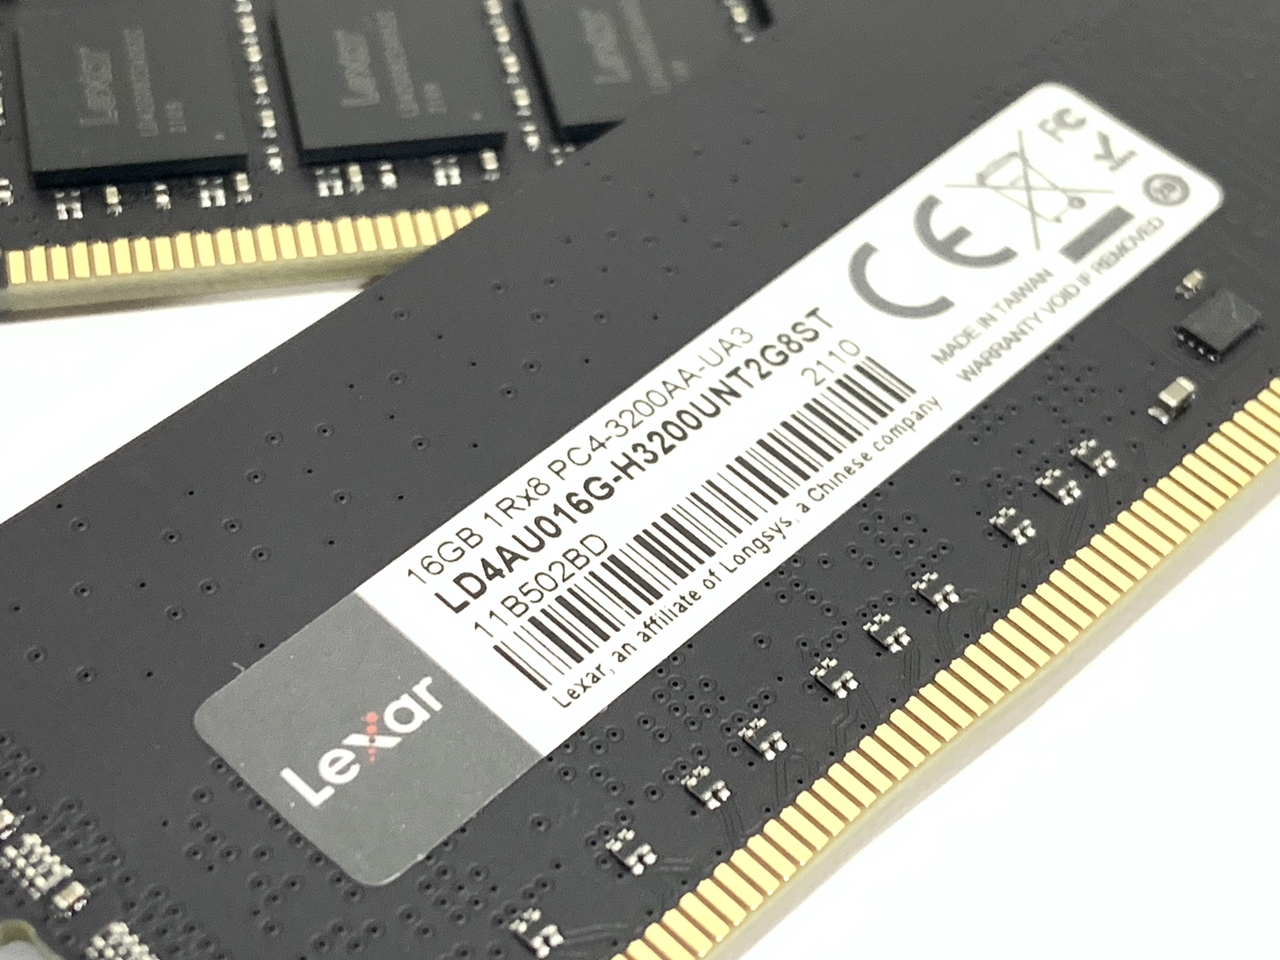 Lexar DDR4-3200 review: The cost-effective RAM upgrade! - Digital Citizen